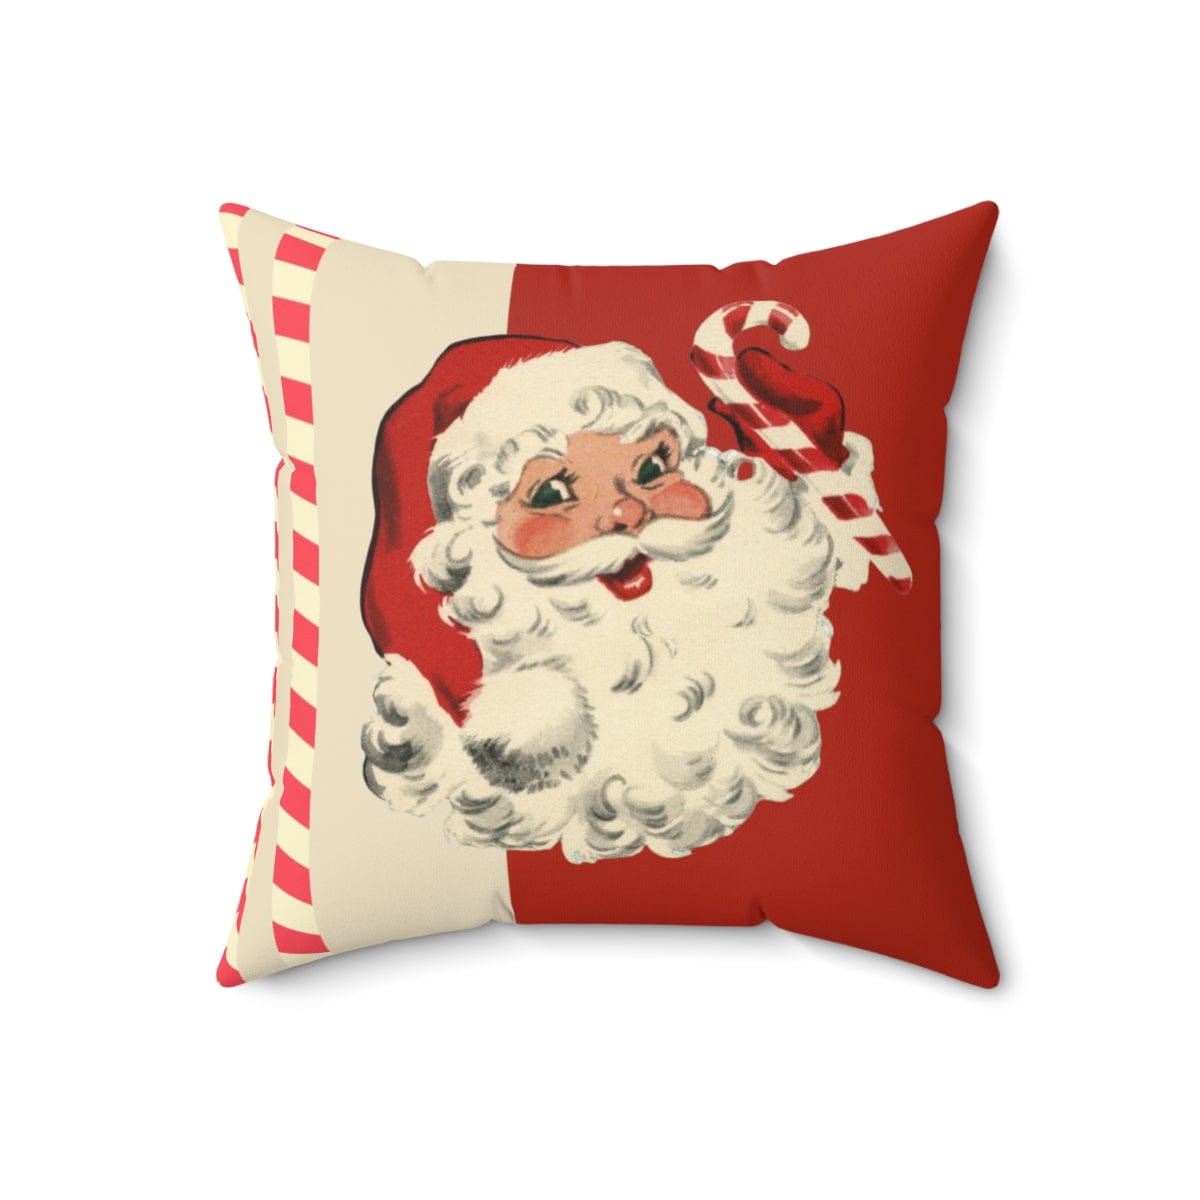 Vintage Santa Claus, Retro Christmas, Mid Century Modern Holiday, Cranberry Red, Beige, Candy Cane Stripe, Pillow And Insert Home Decor